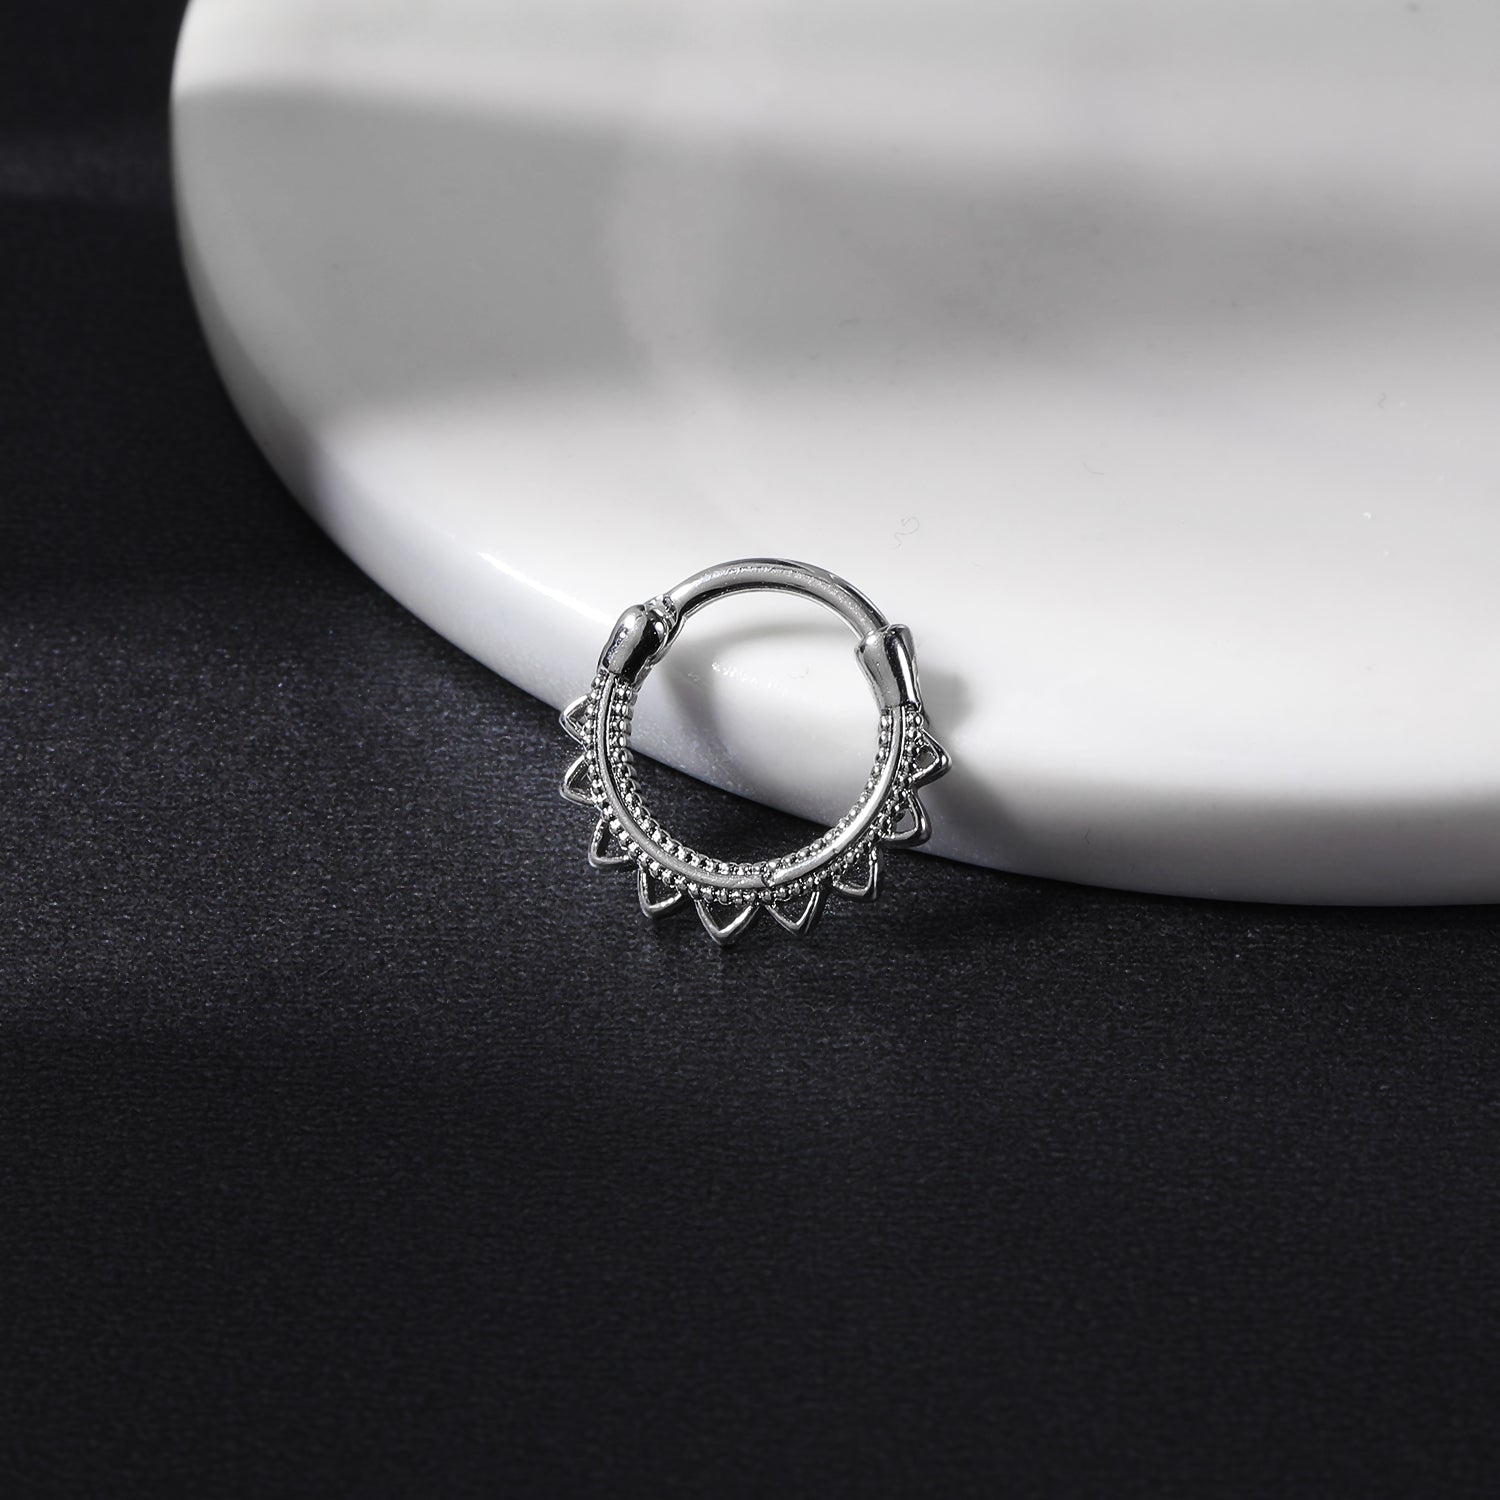 16g-geometry-septum-clicker-nose-ring-triangle-cartilage-helix-piercing